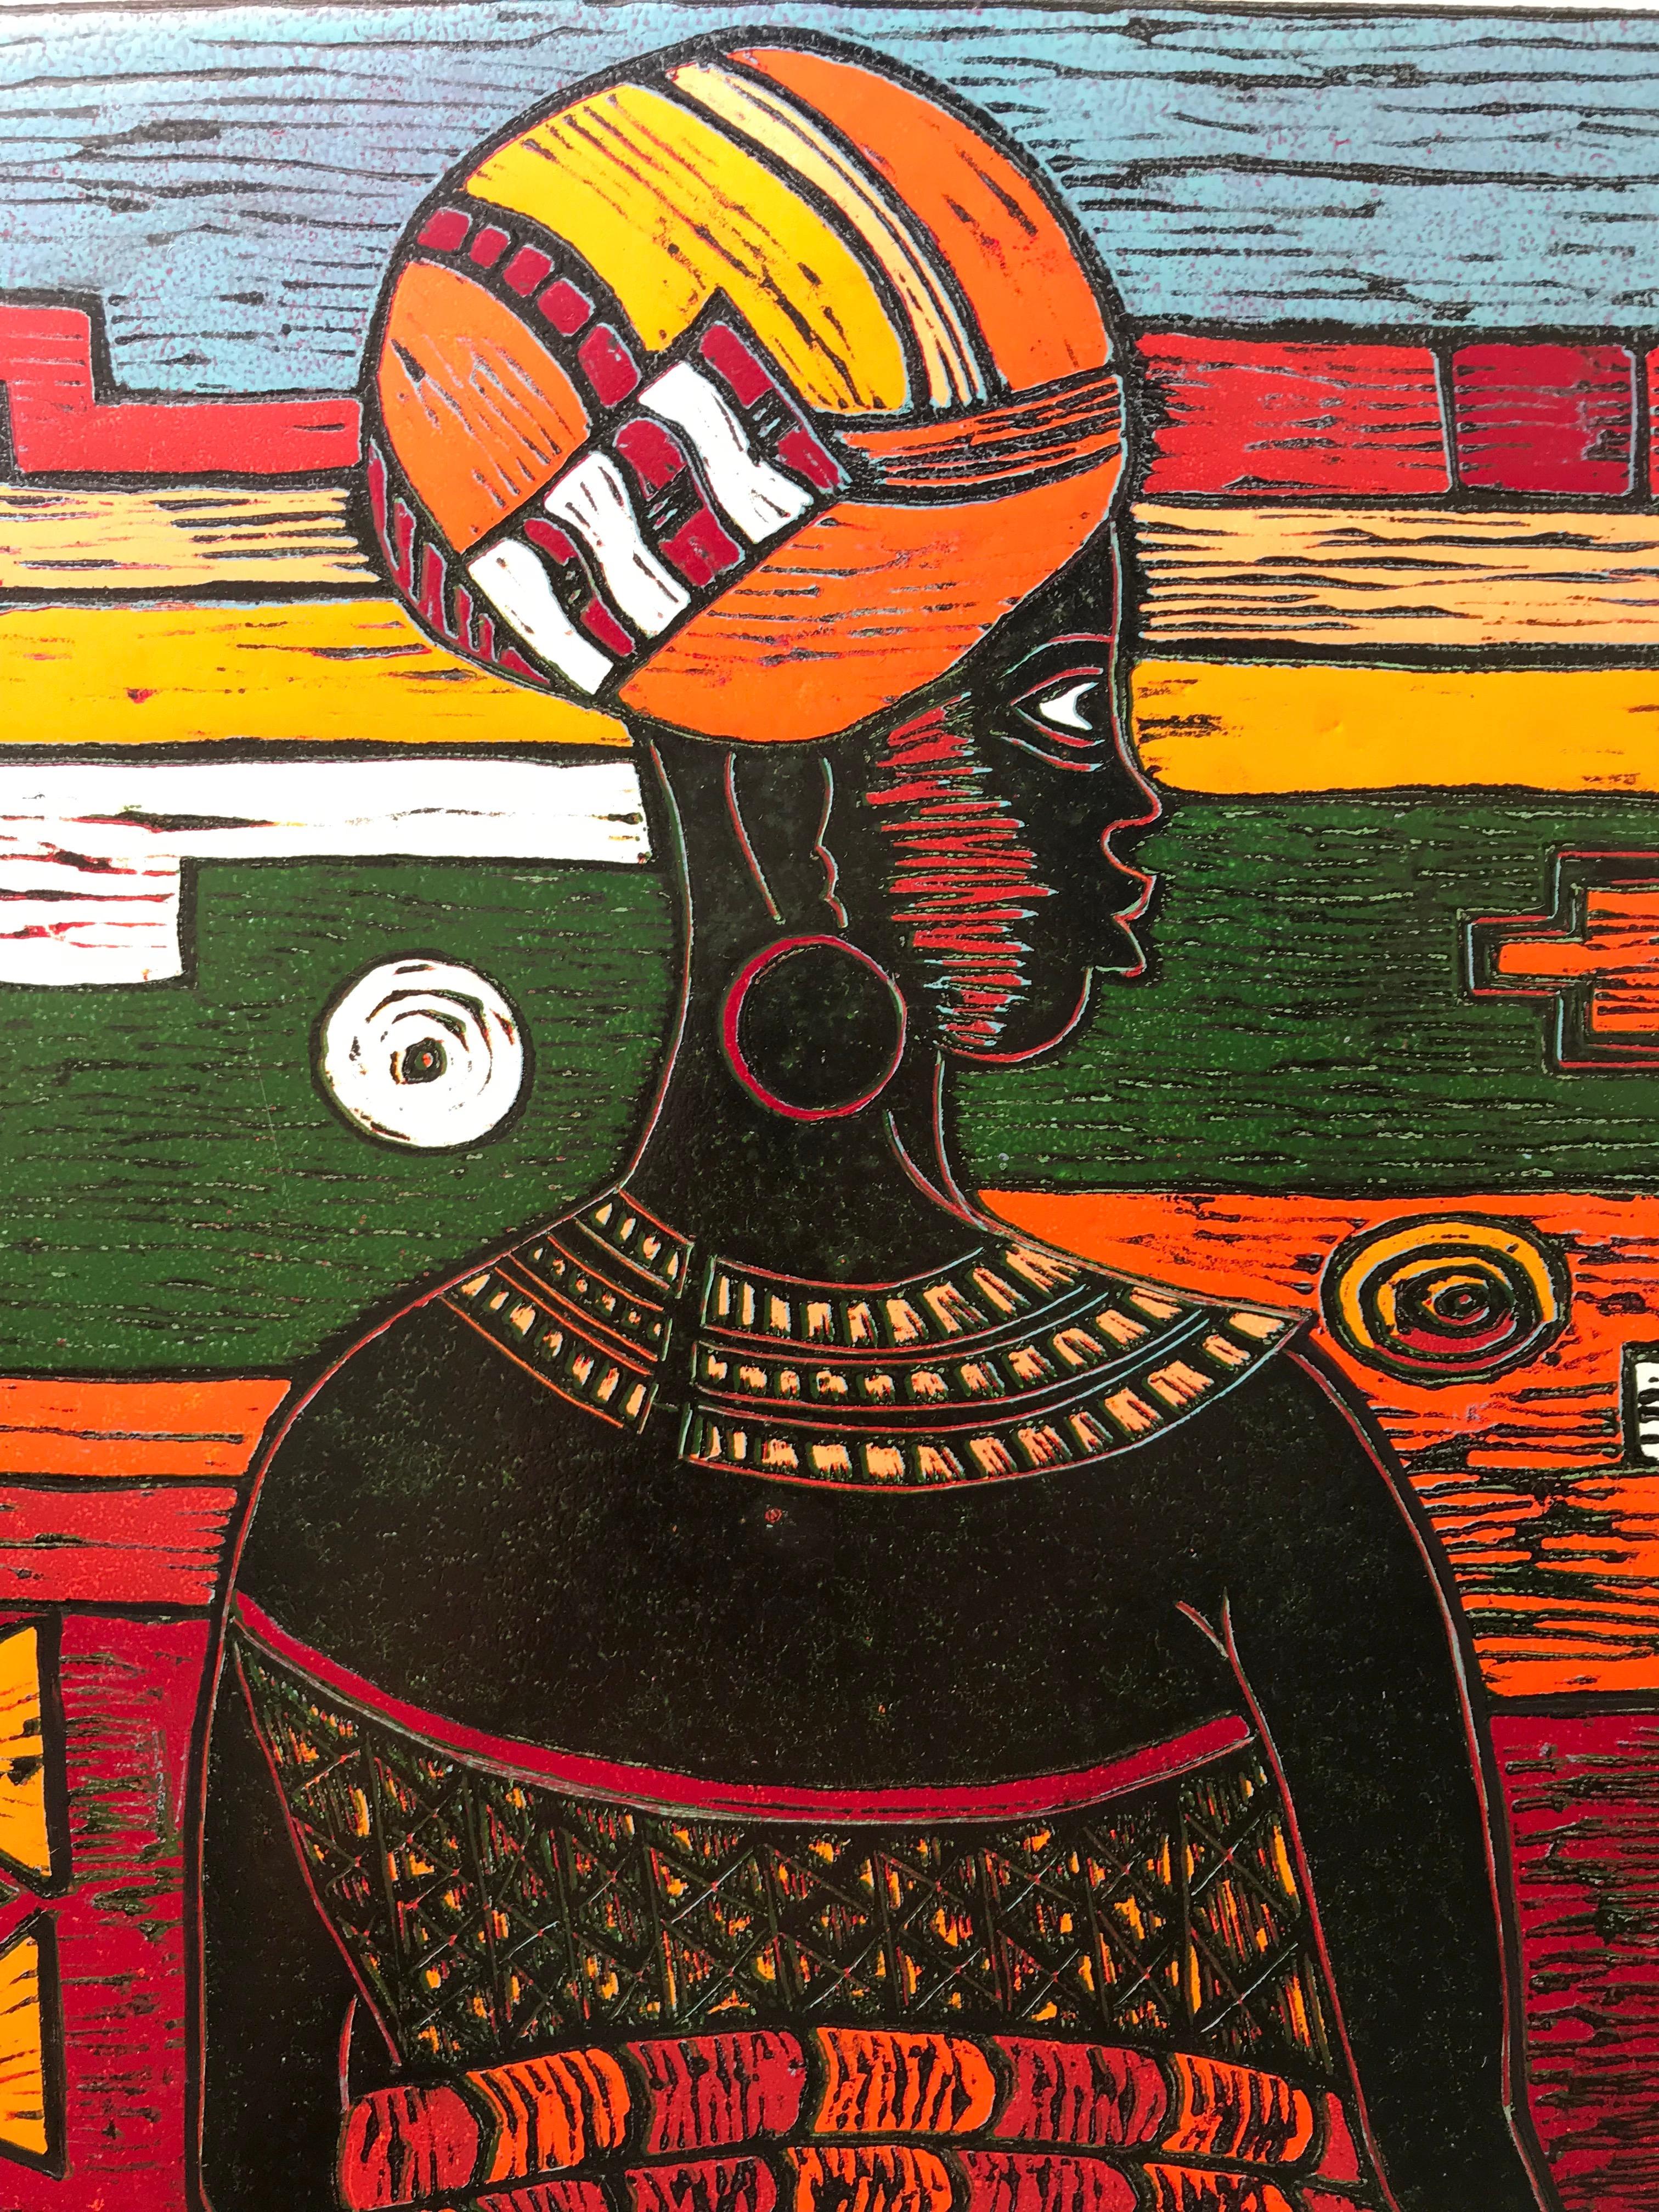 21 st century South African Wood Cut Print on paper - African Dream - Black Figurative Print by Isaac Sithole